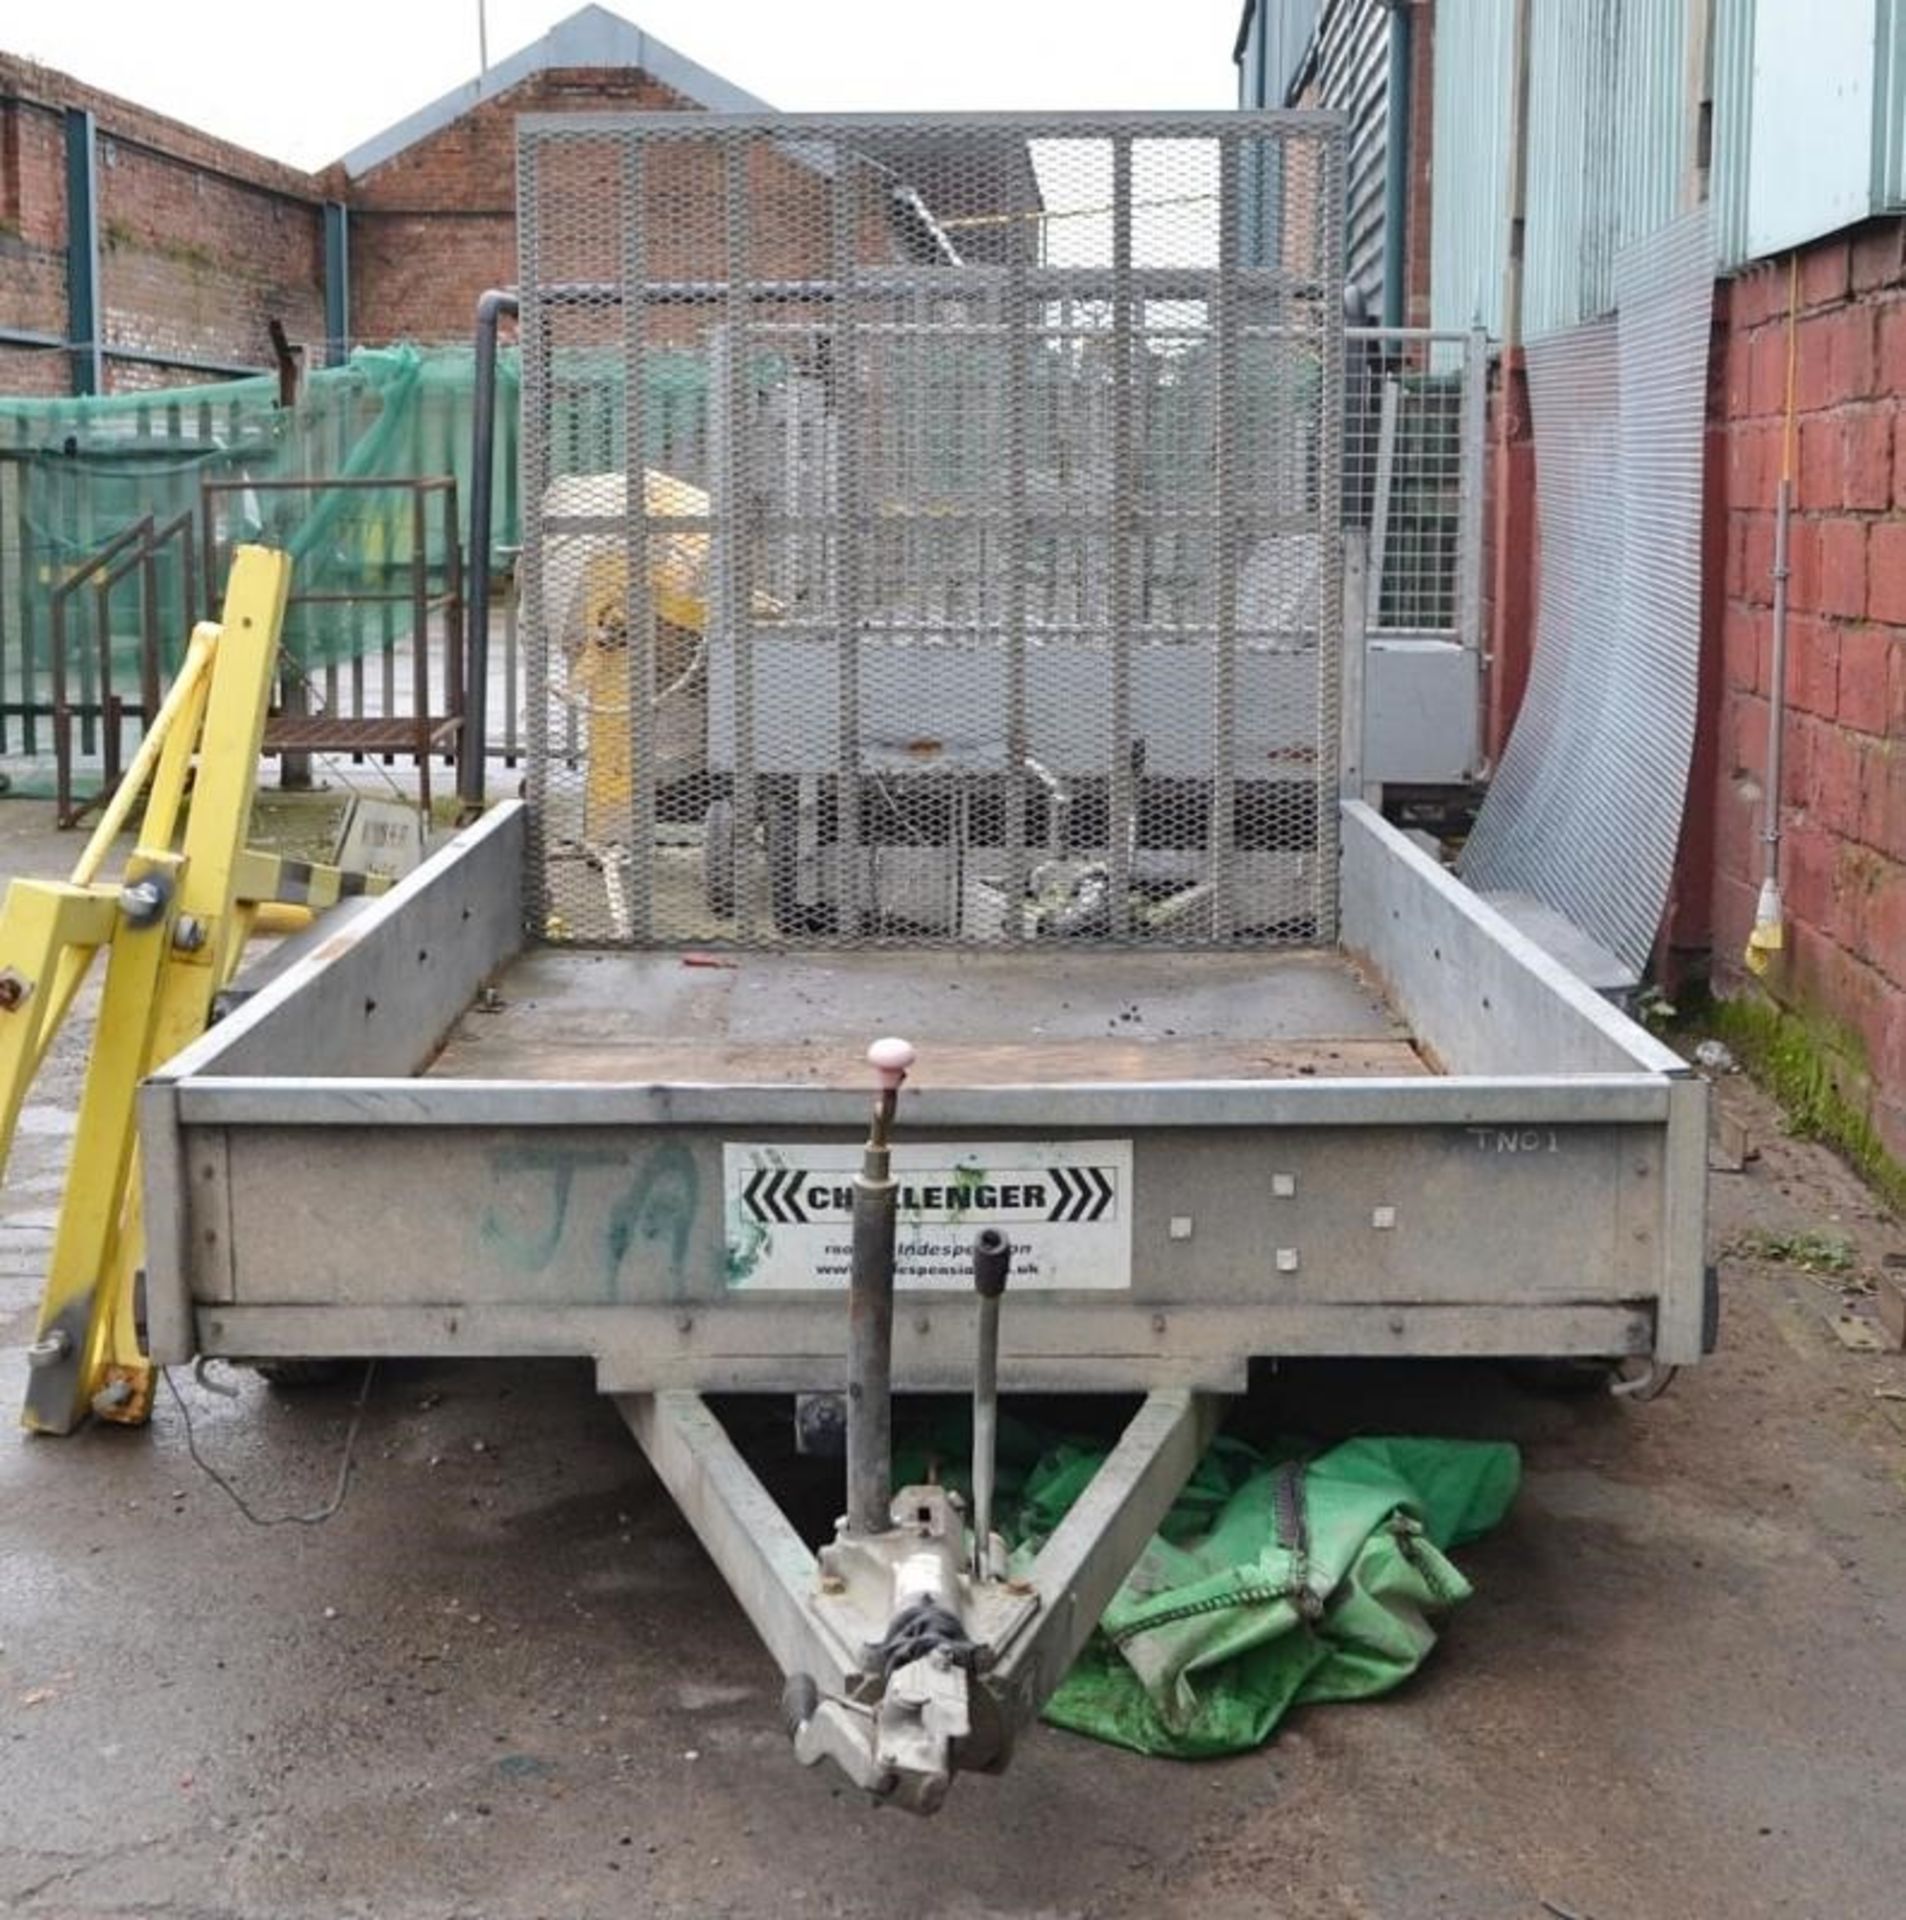 1 x Challenger Indespension 10ft Trailer With 2300Kg Gross Weight - CL464 - Location:Liverpool L19 - Image 14 of 25